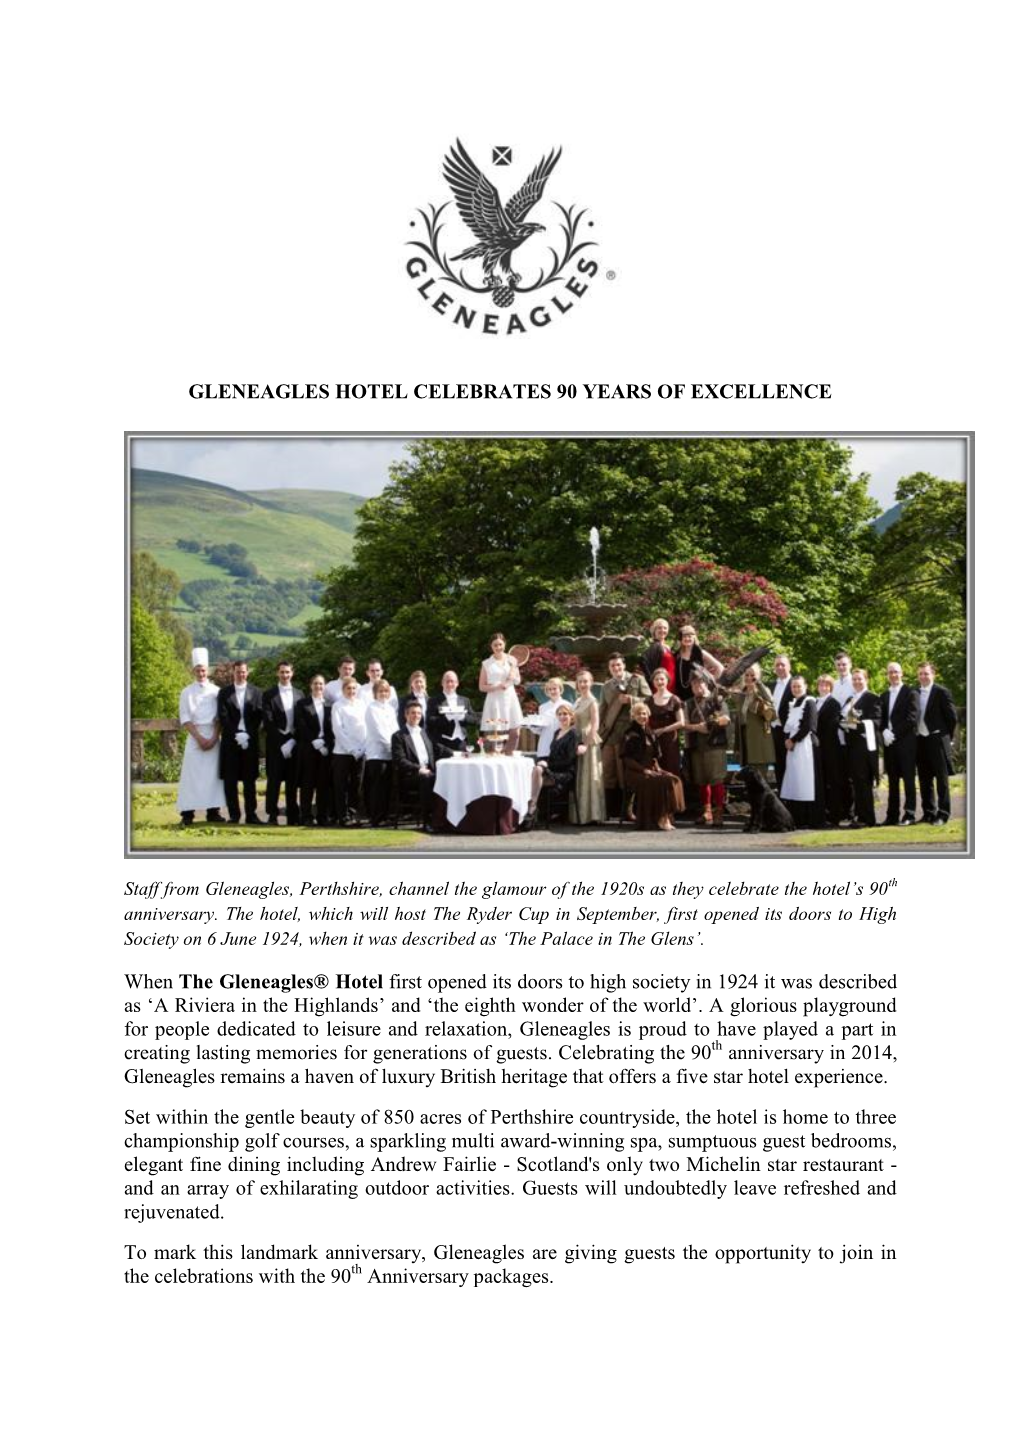 Gleneagles Hotel Celebrates 90 Years of Excellence